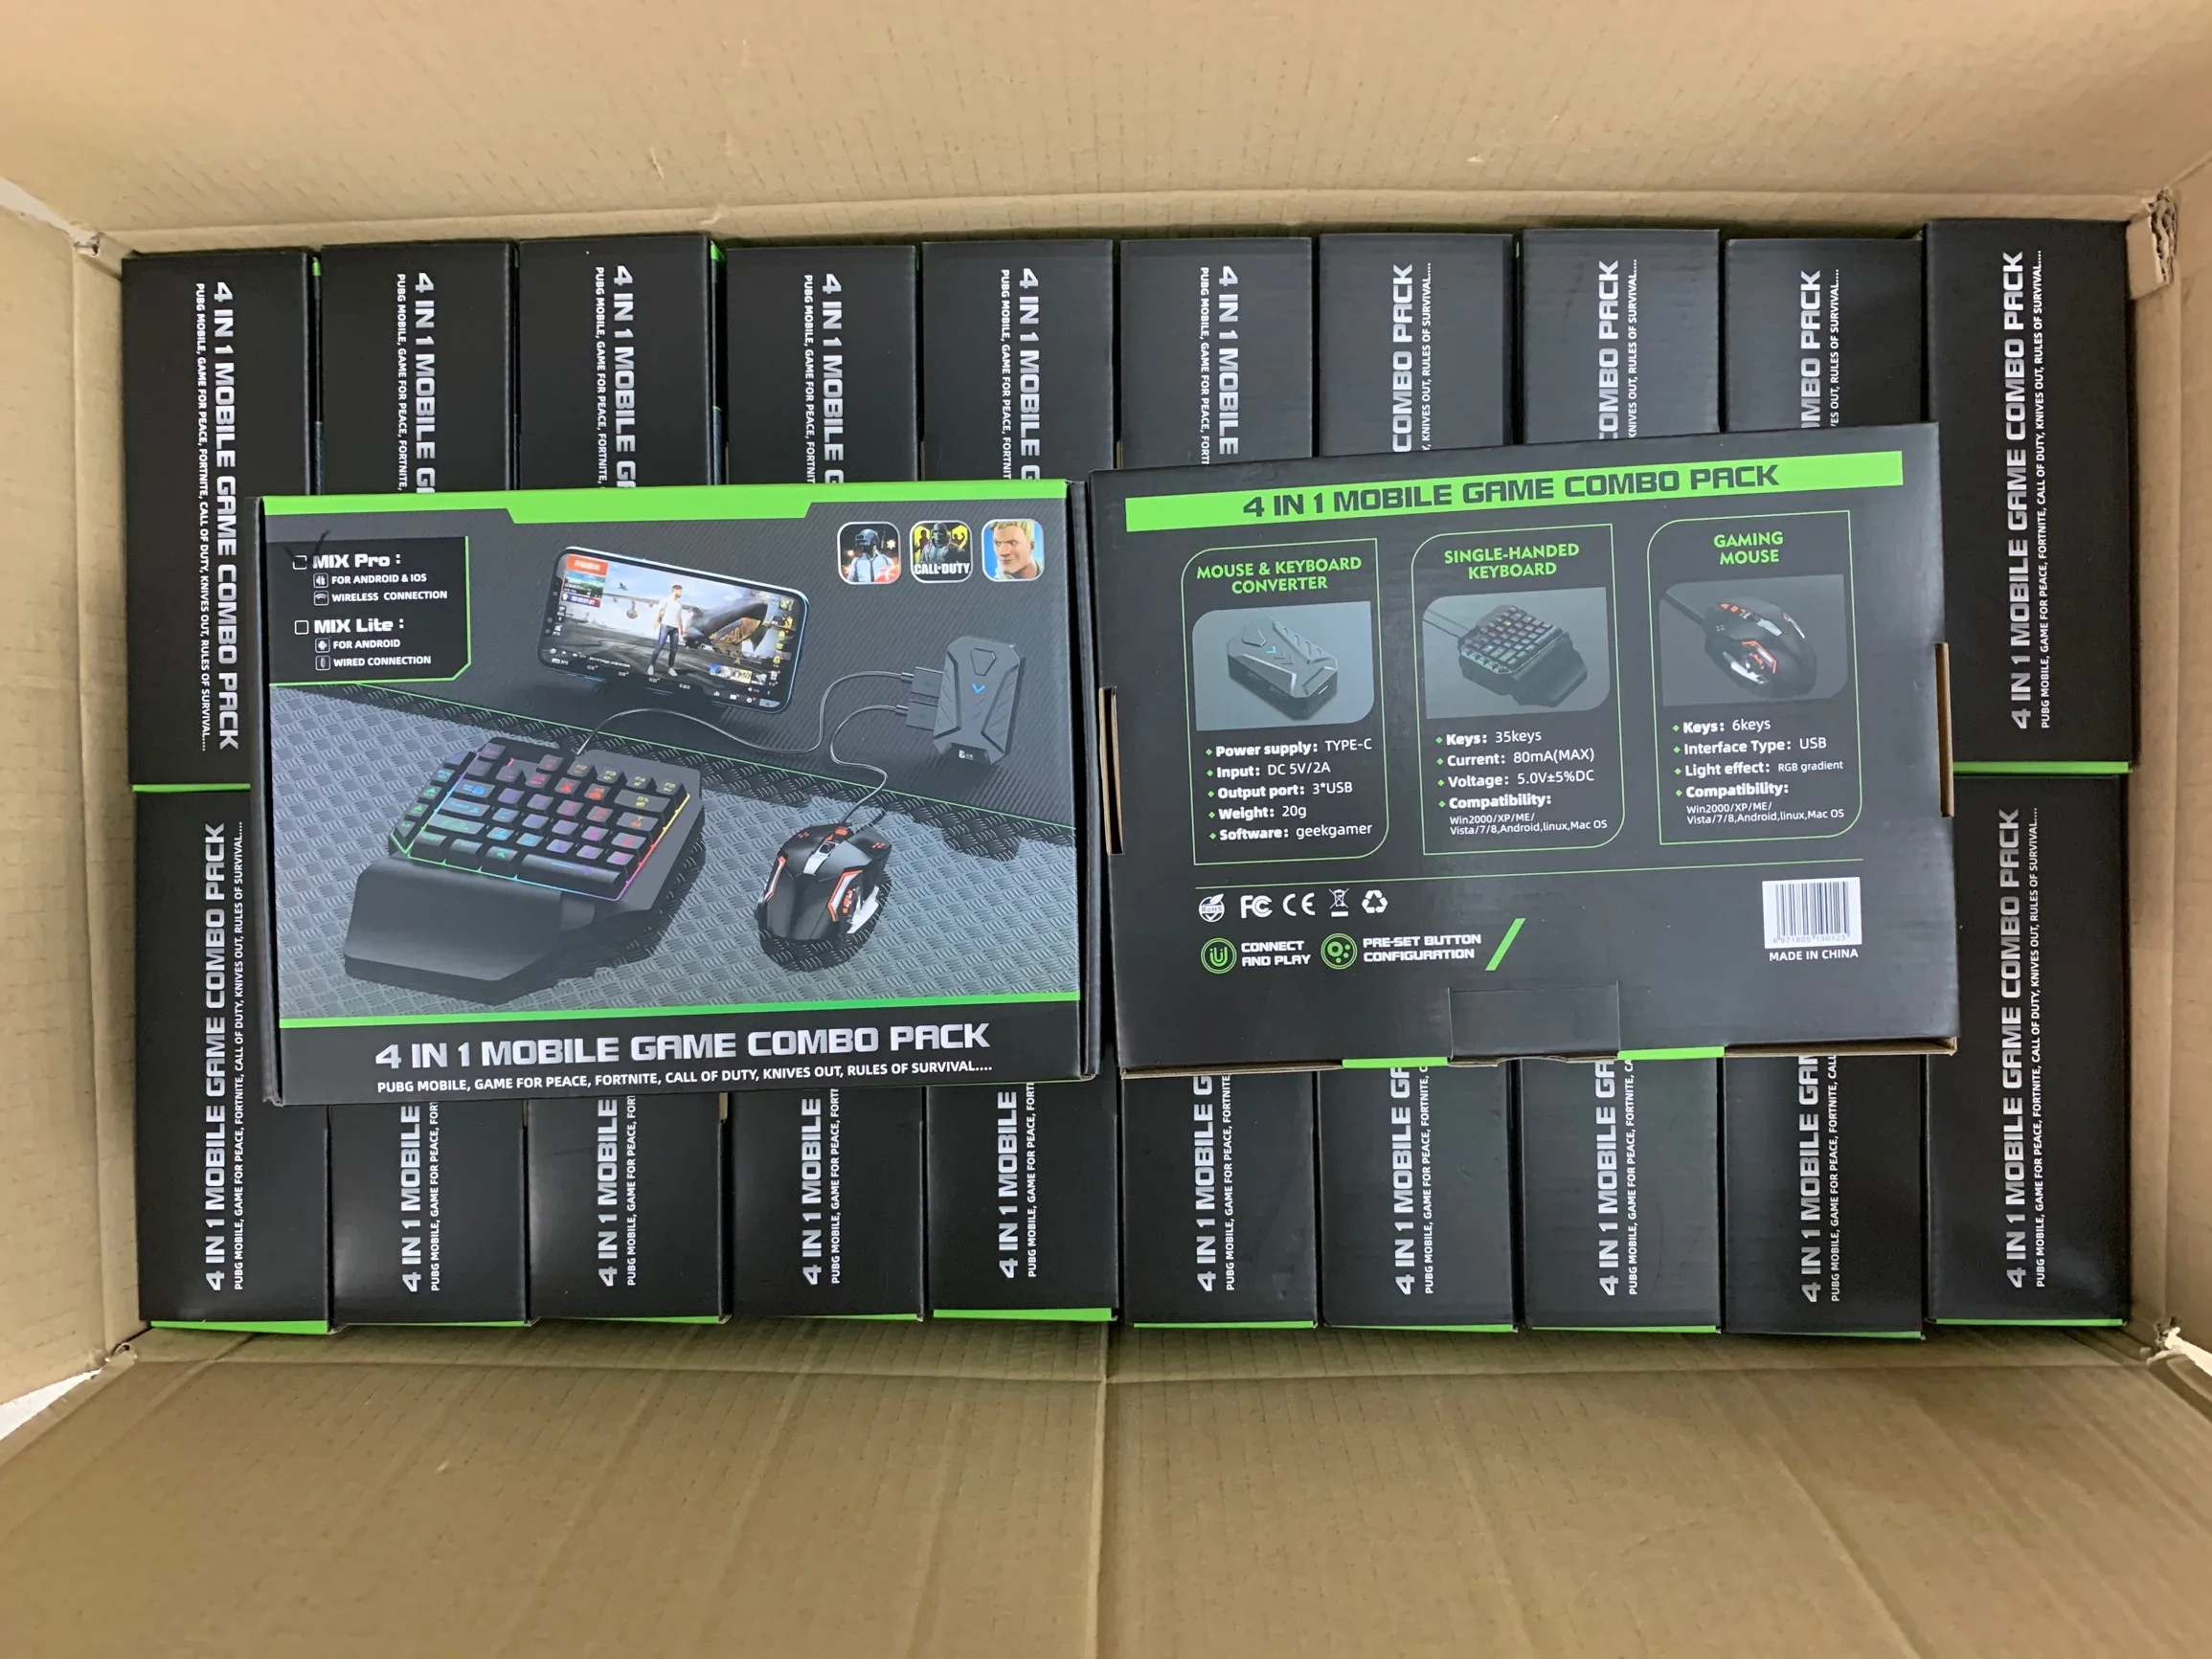 Mobile game combo pack. 4 In 1 mobile game Combo Pack. 4in1 Gaming Combo. PUBG Mix Pro Combo Keyboard. Mk500 5 in 1 mobile game Combo Pack.